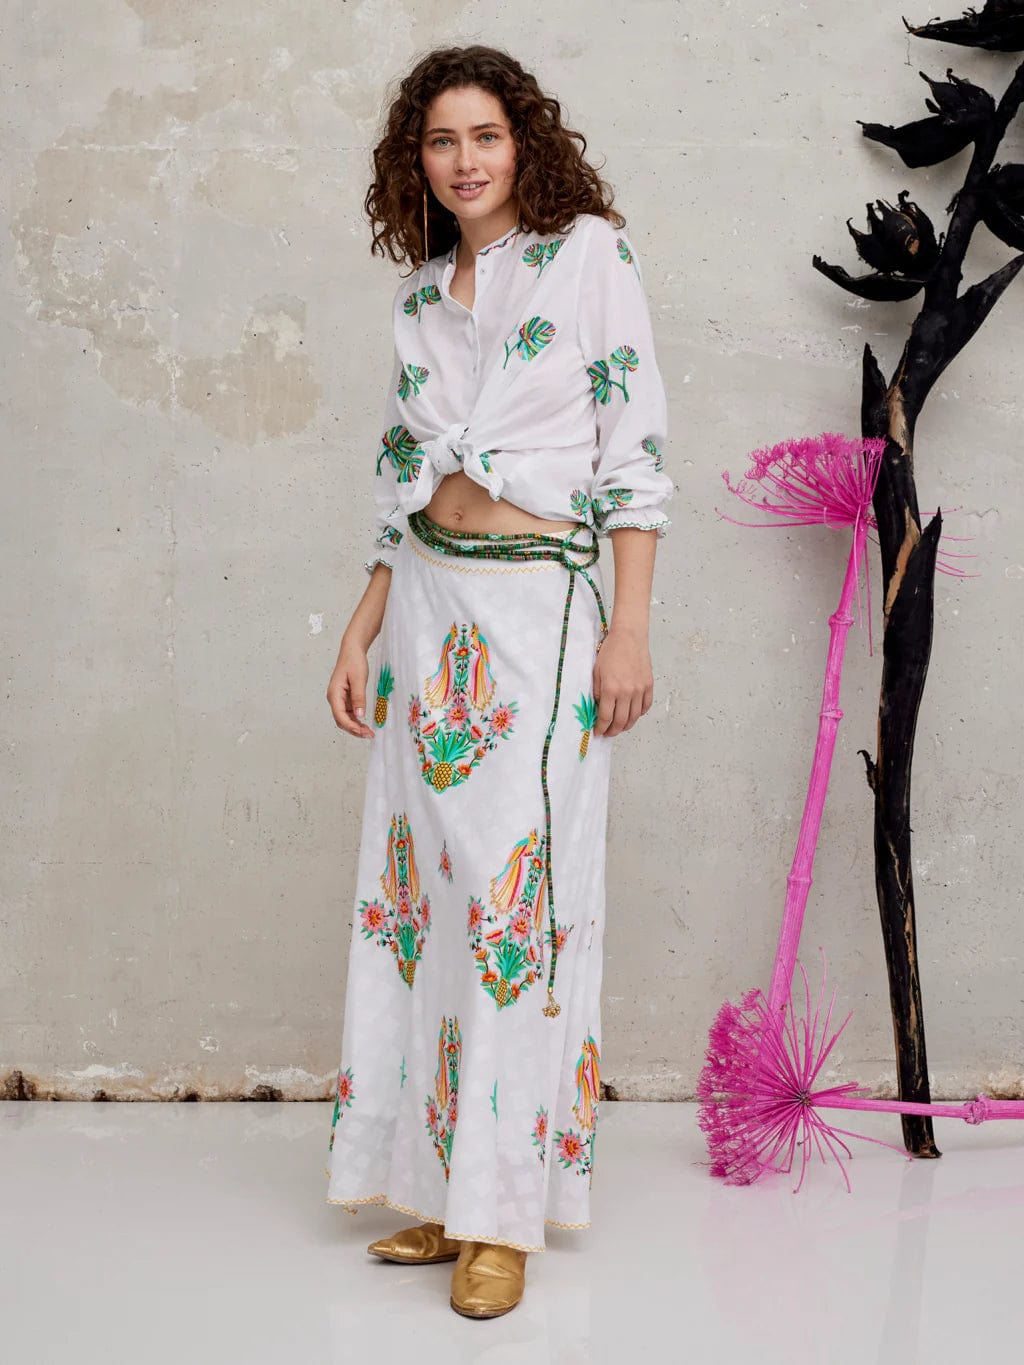 Nimo with Love Columbia Blouse Palm Leaf Embroidery on White